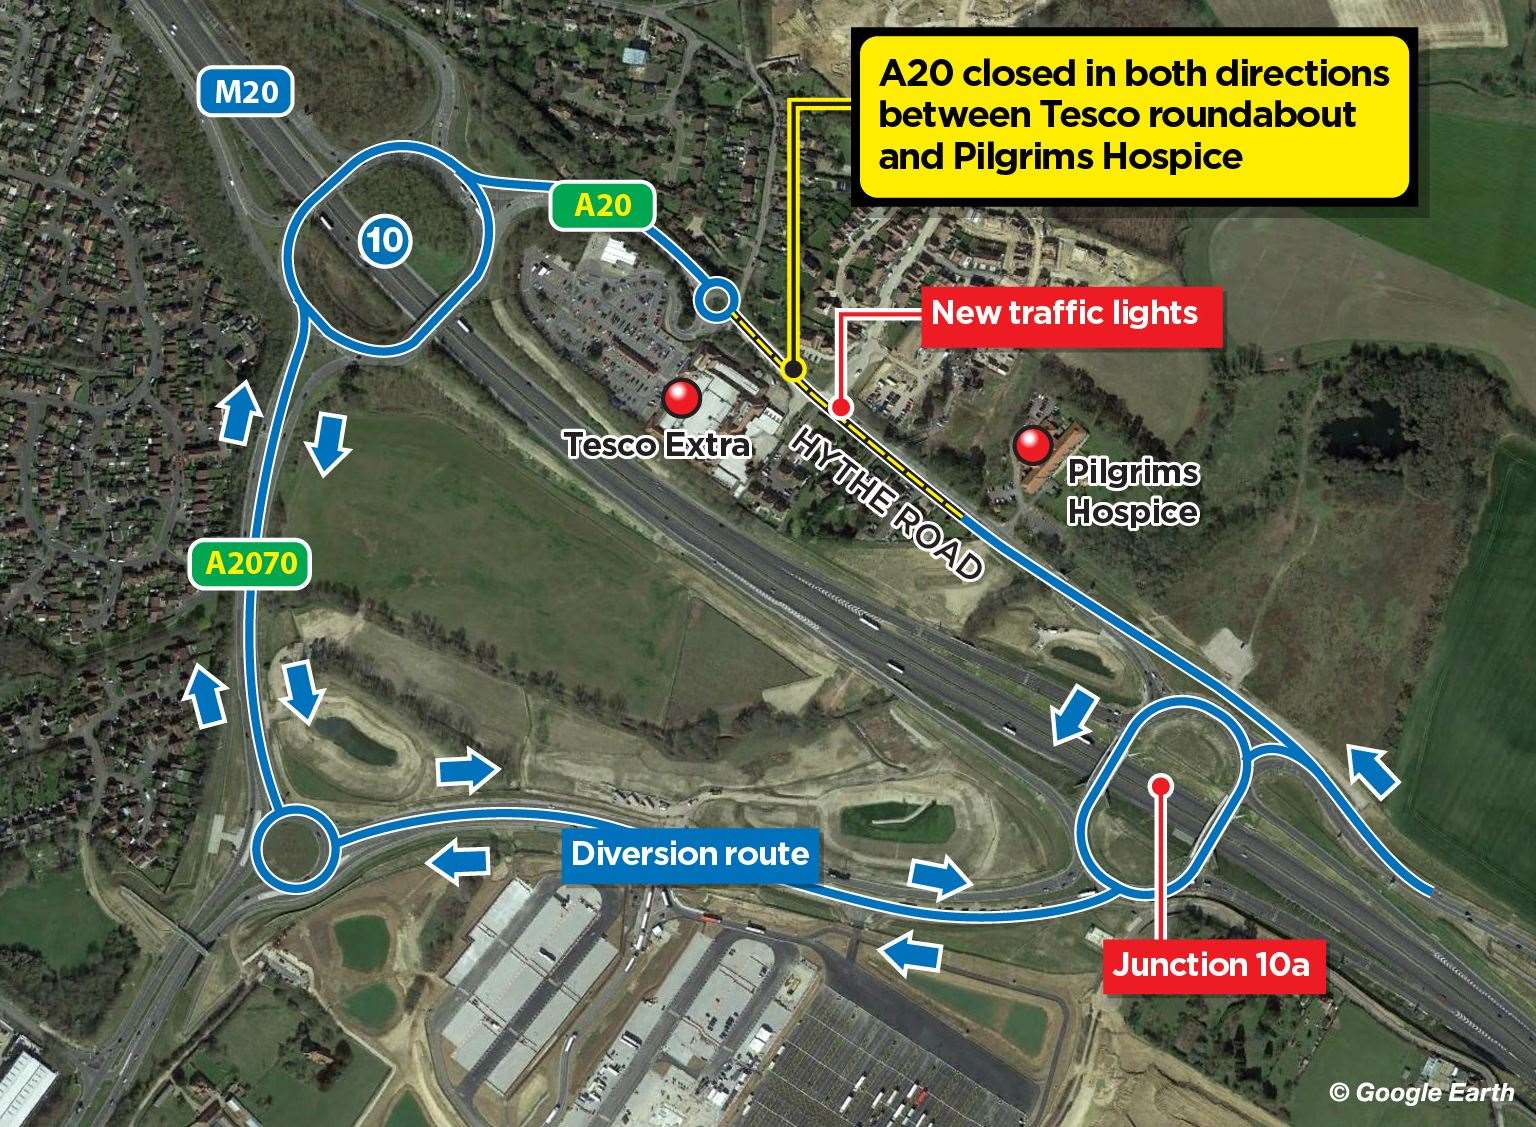 The diversion takes drivers on the A2070 past the Sevington lorry park